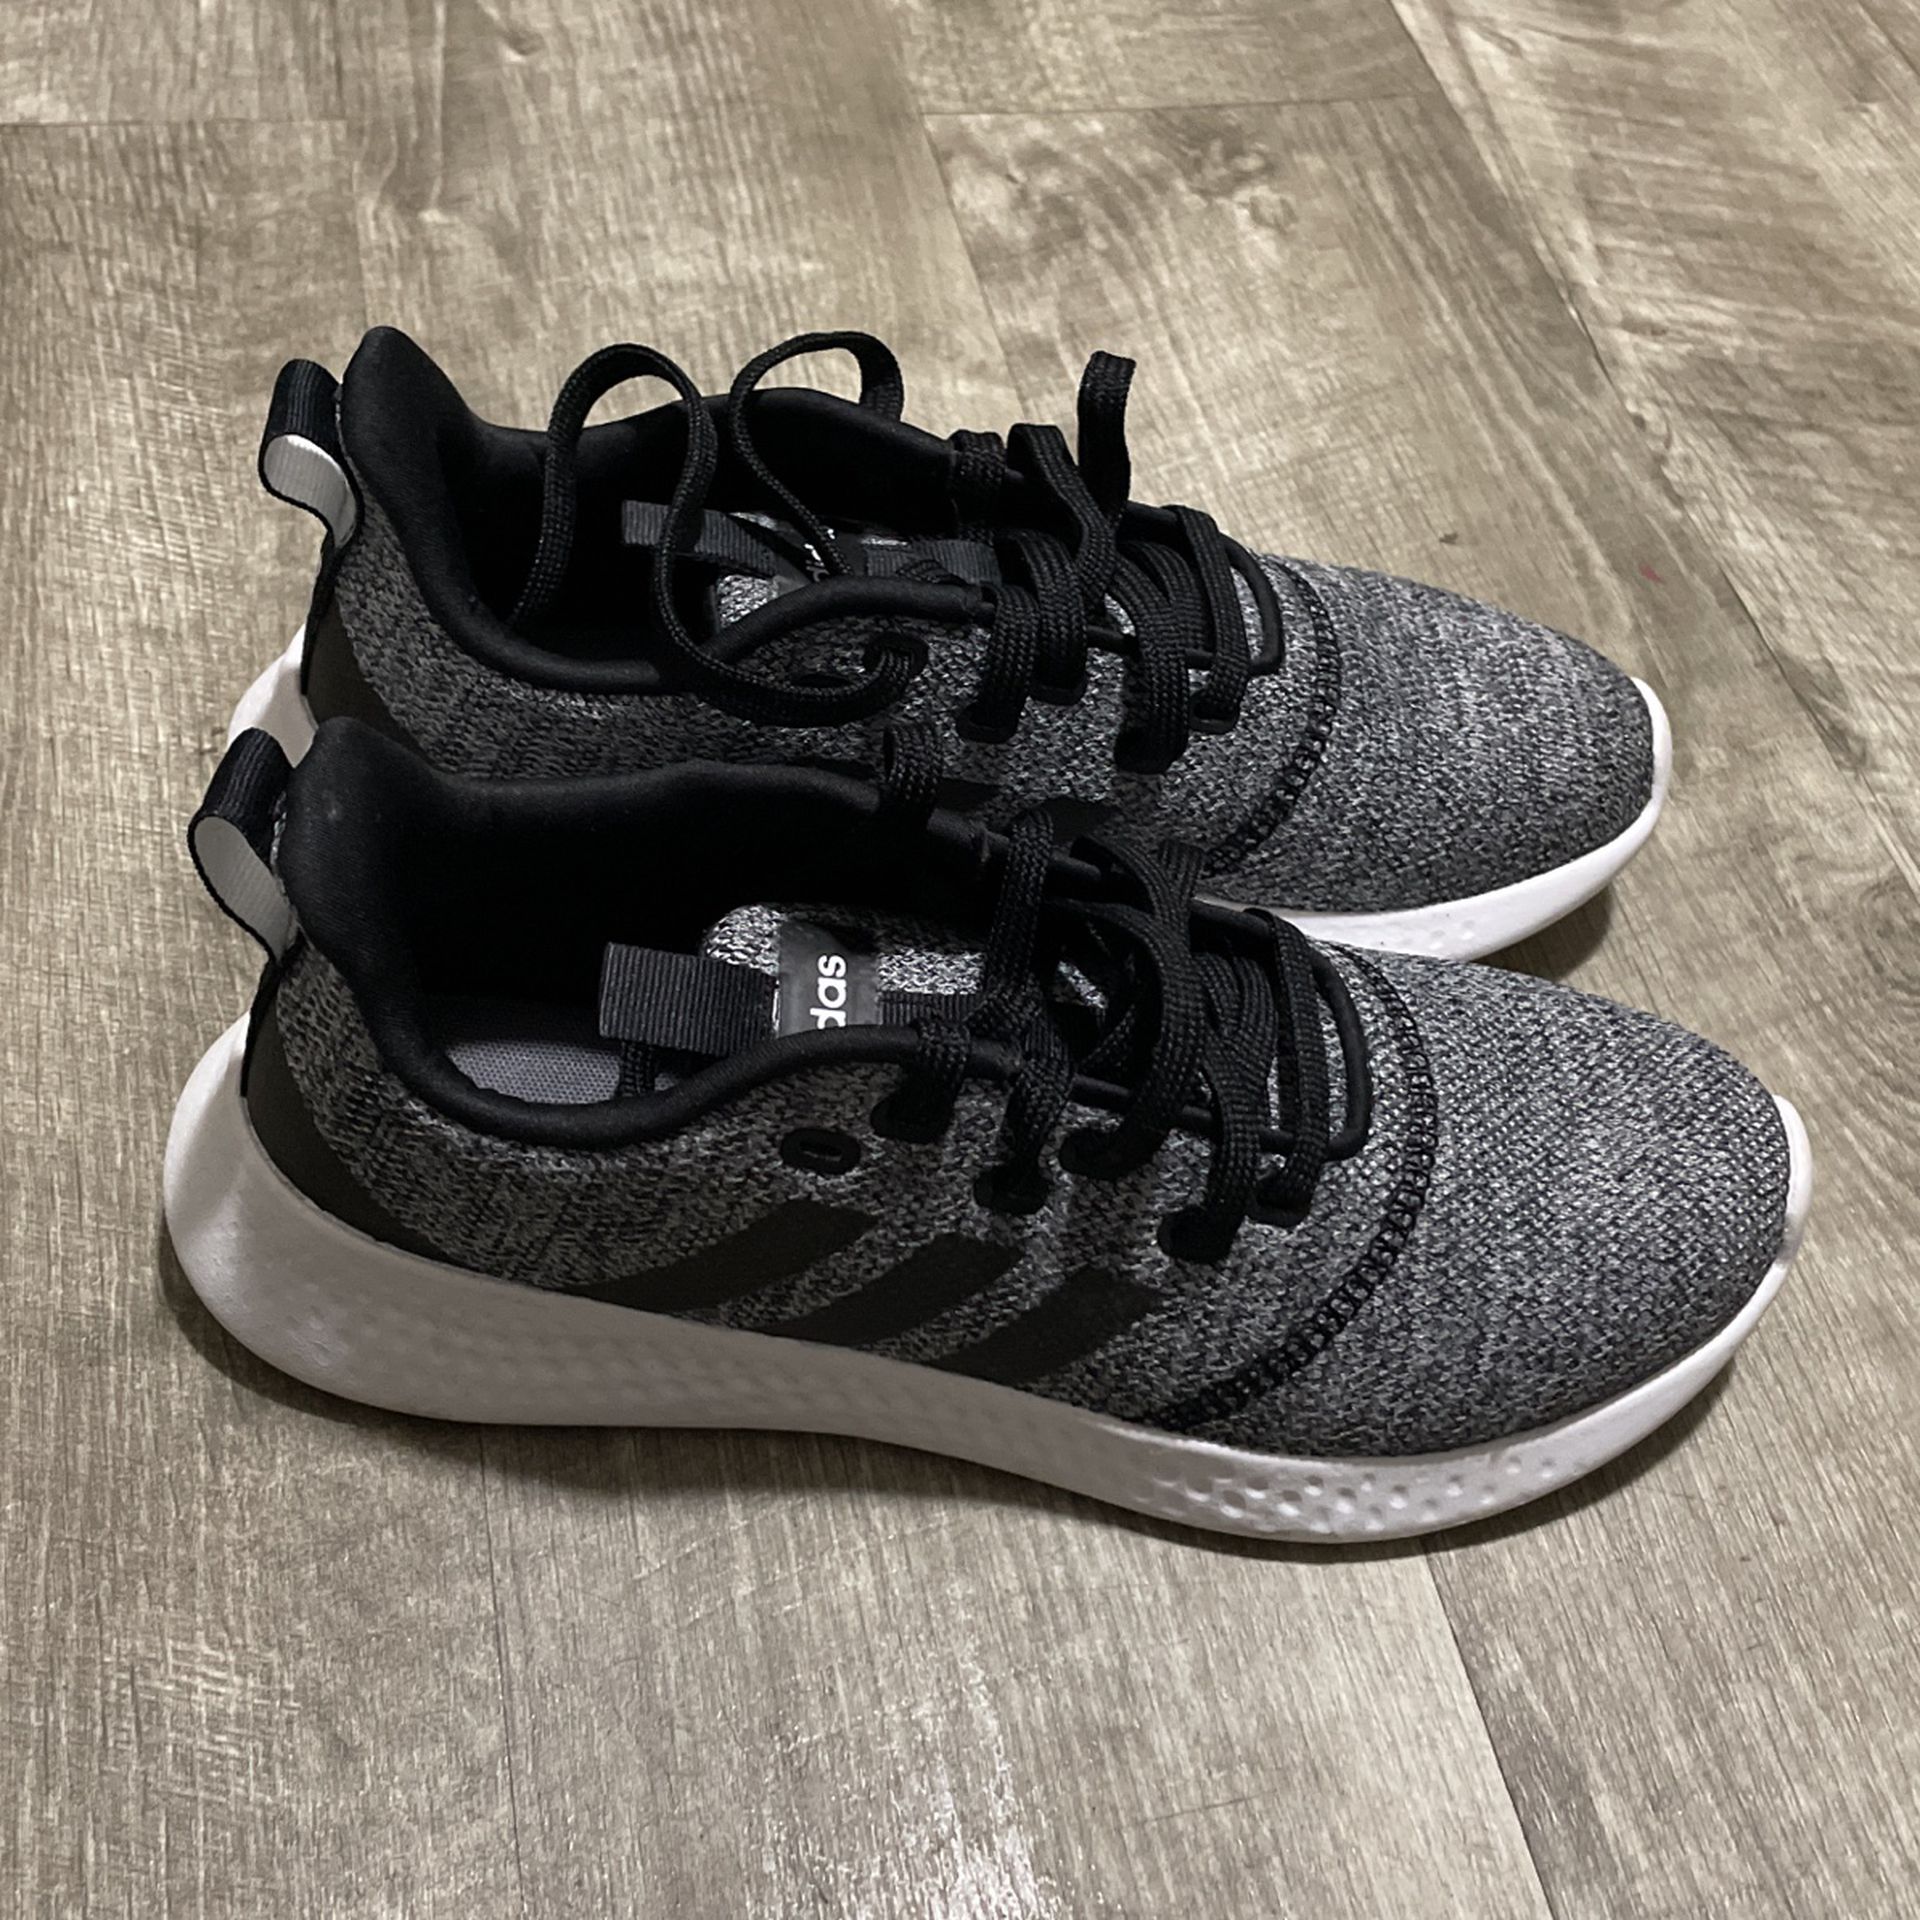 Black And Grey Adidas Shoes 